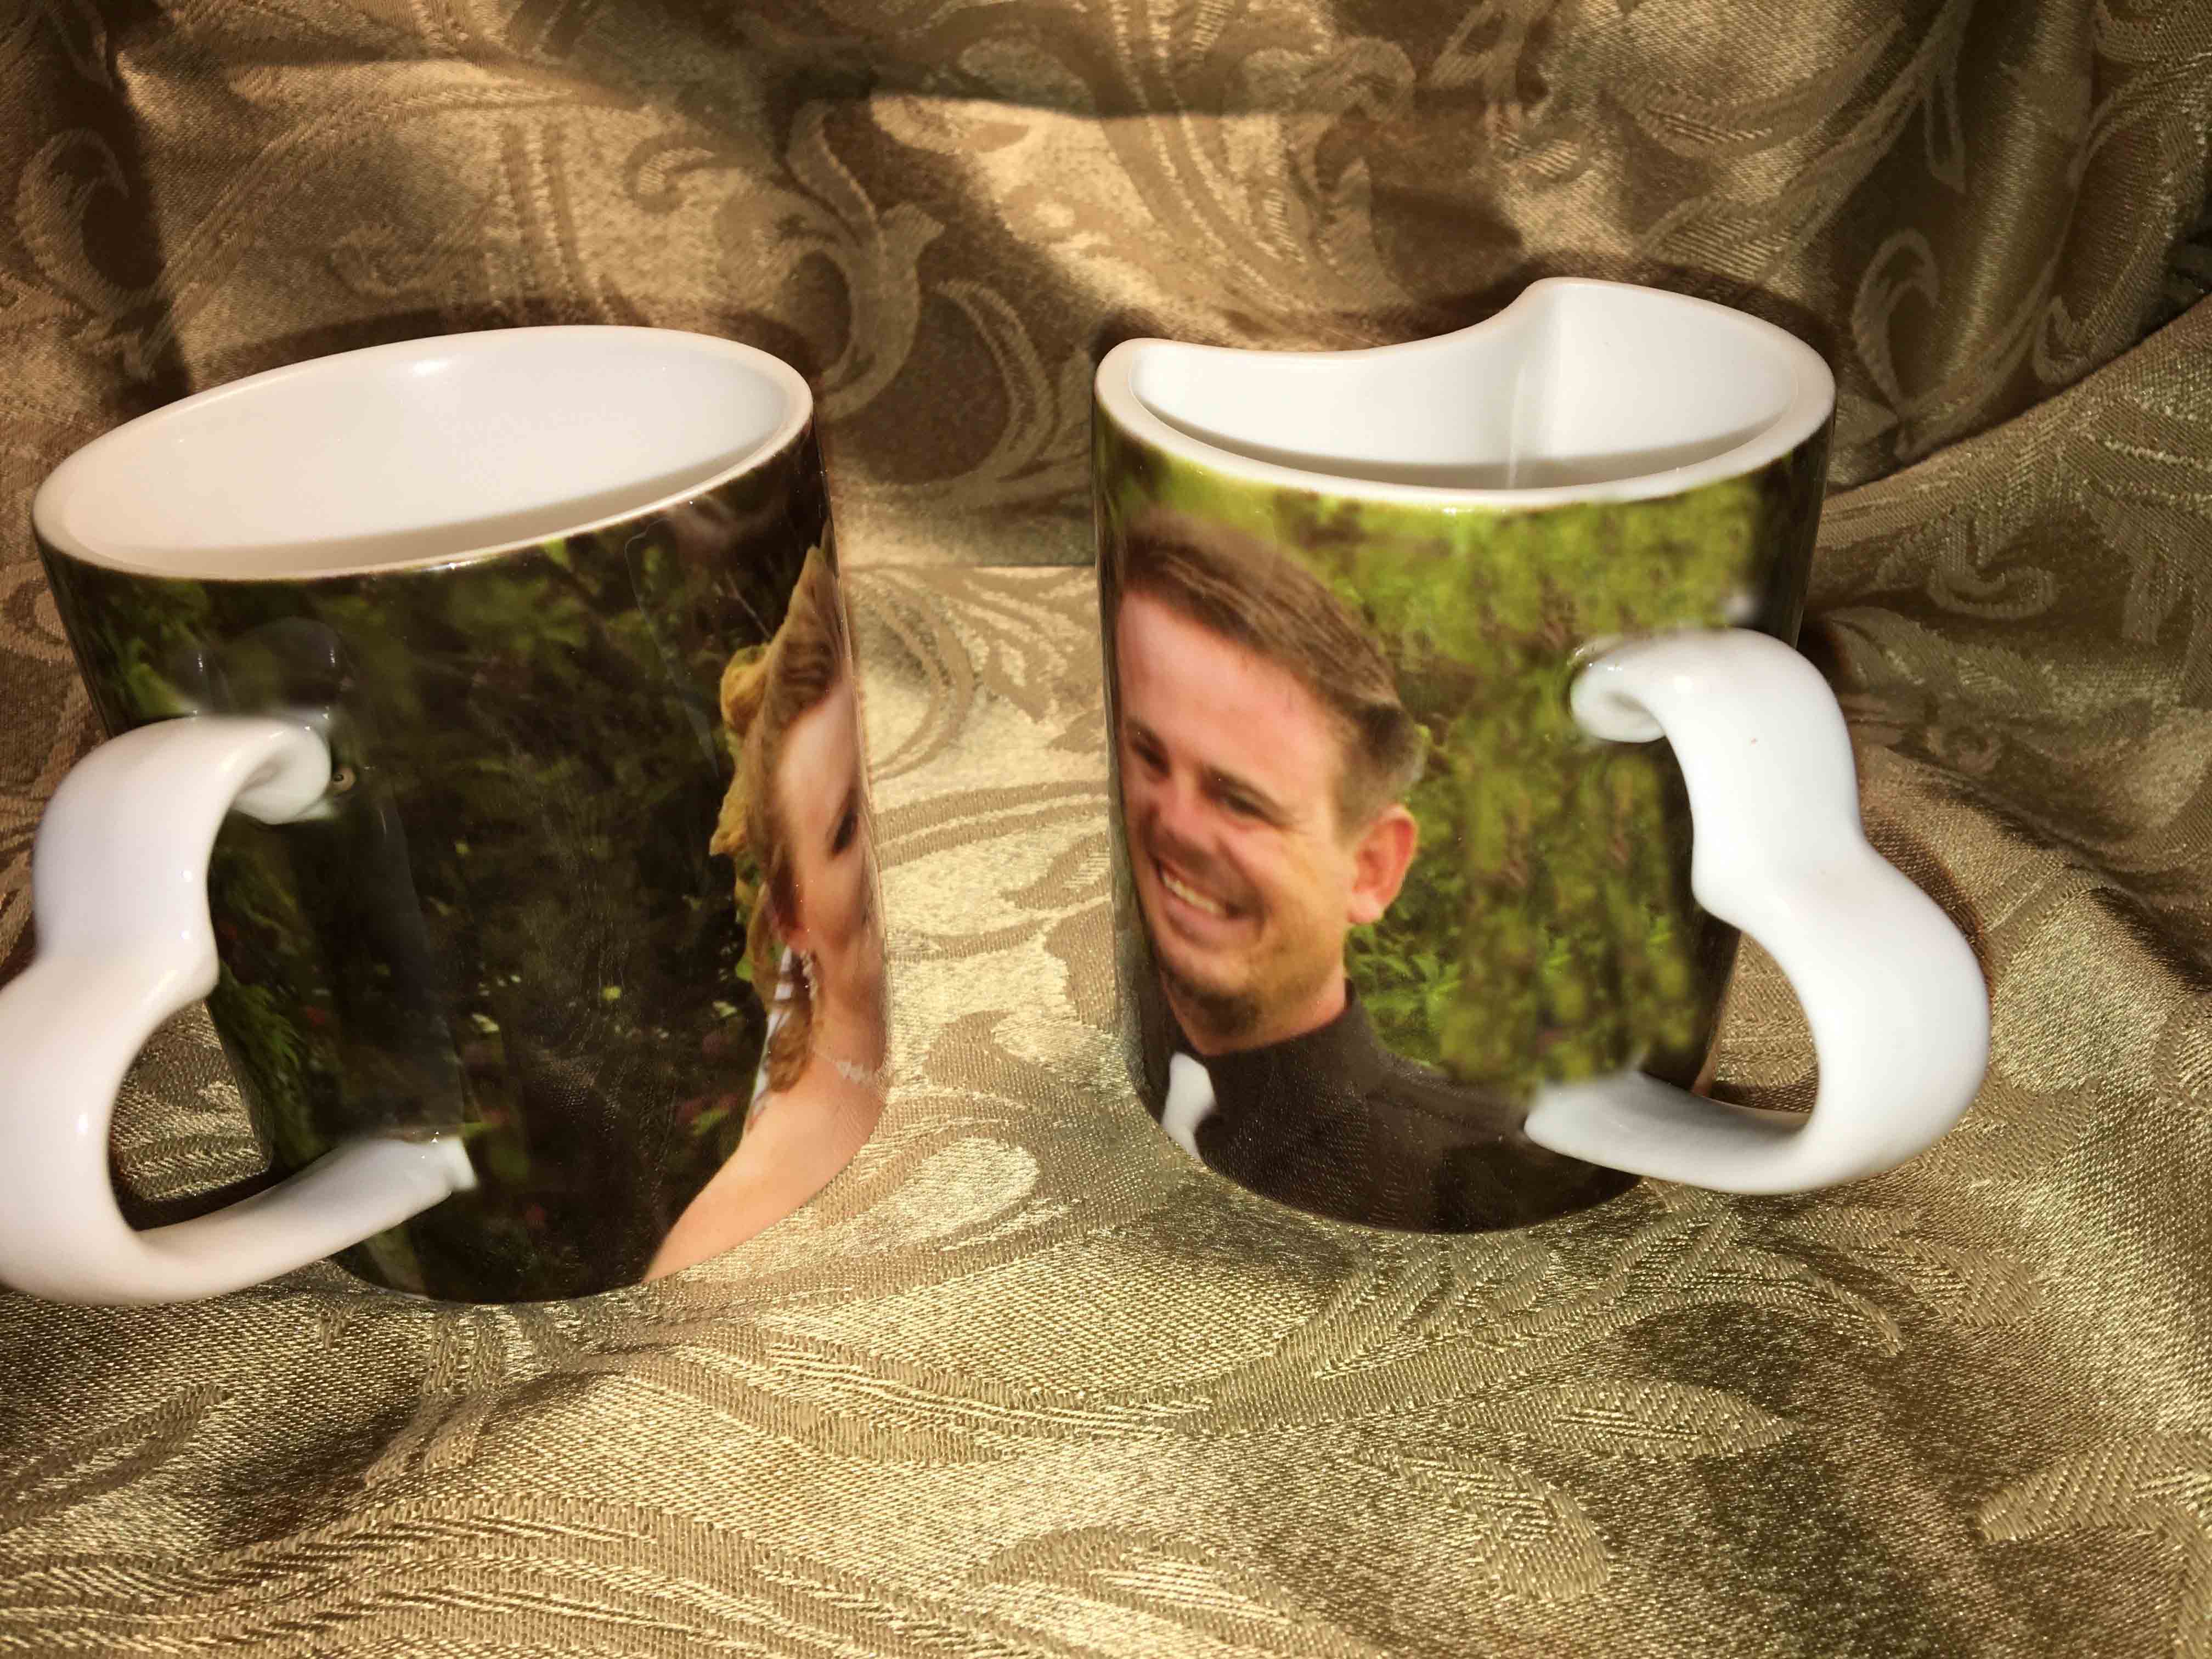 Used the shrink wrap to do a full wrap on the luvmug set . An anniversary gift for my son and d